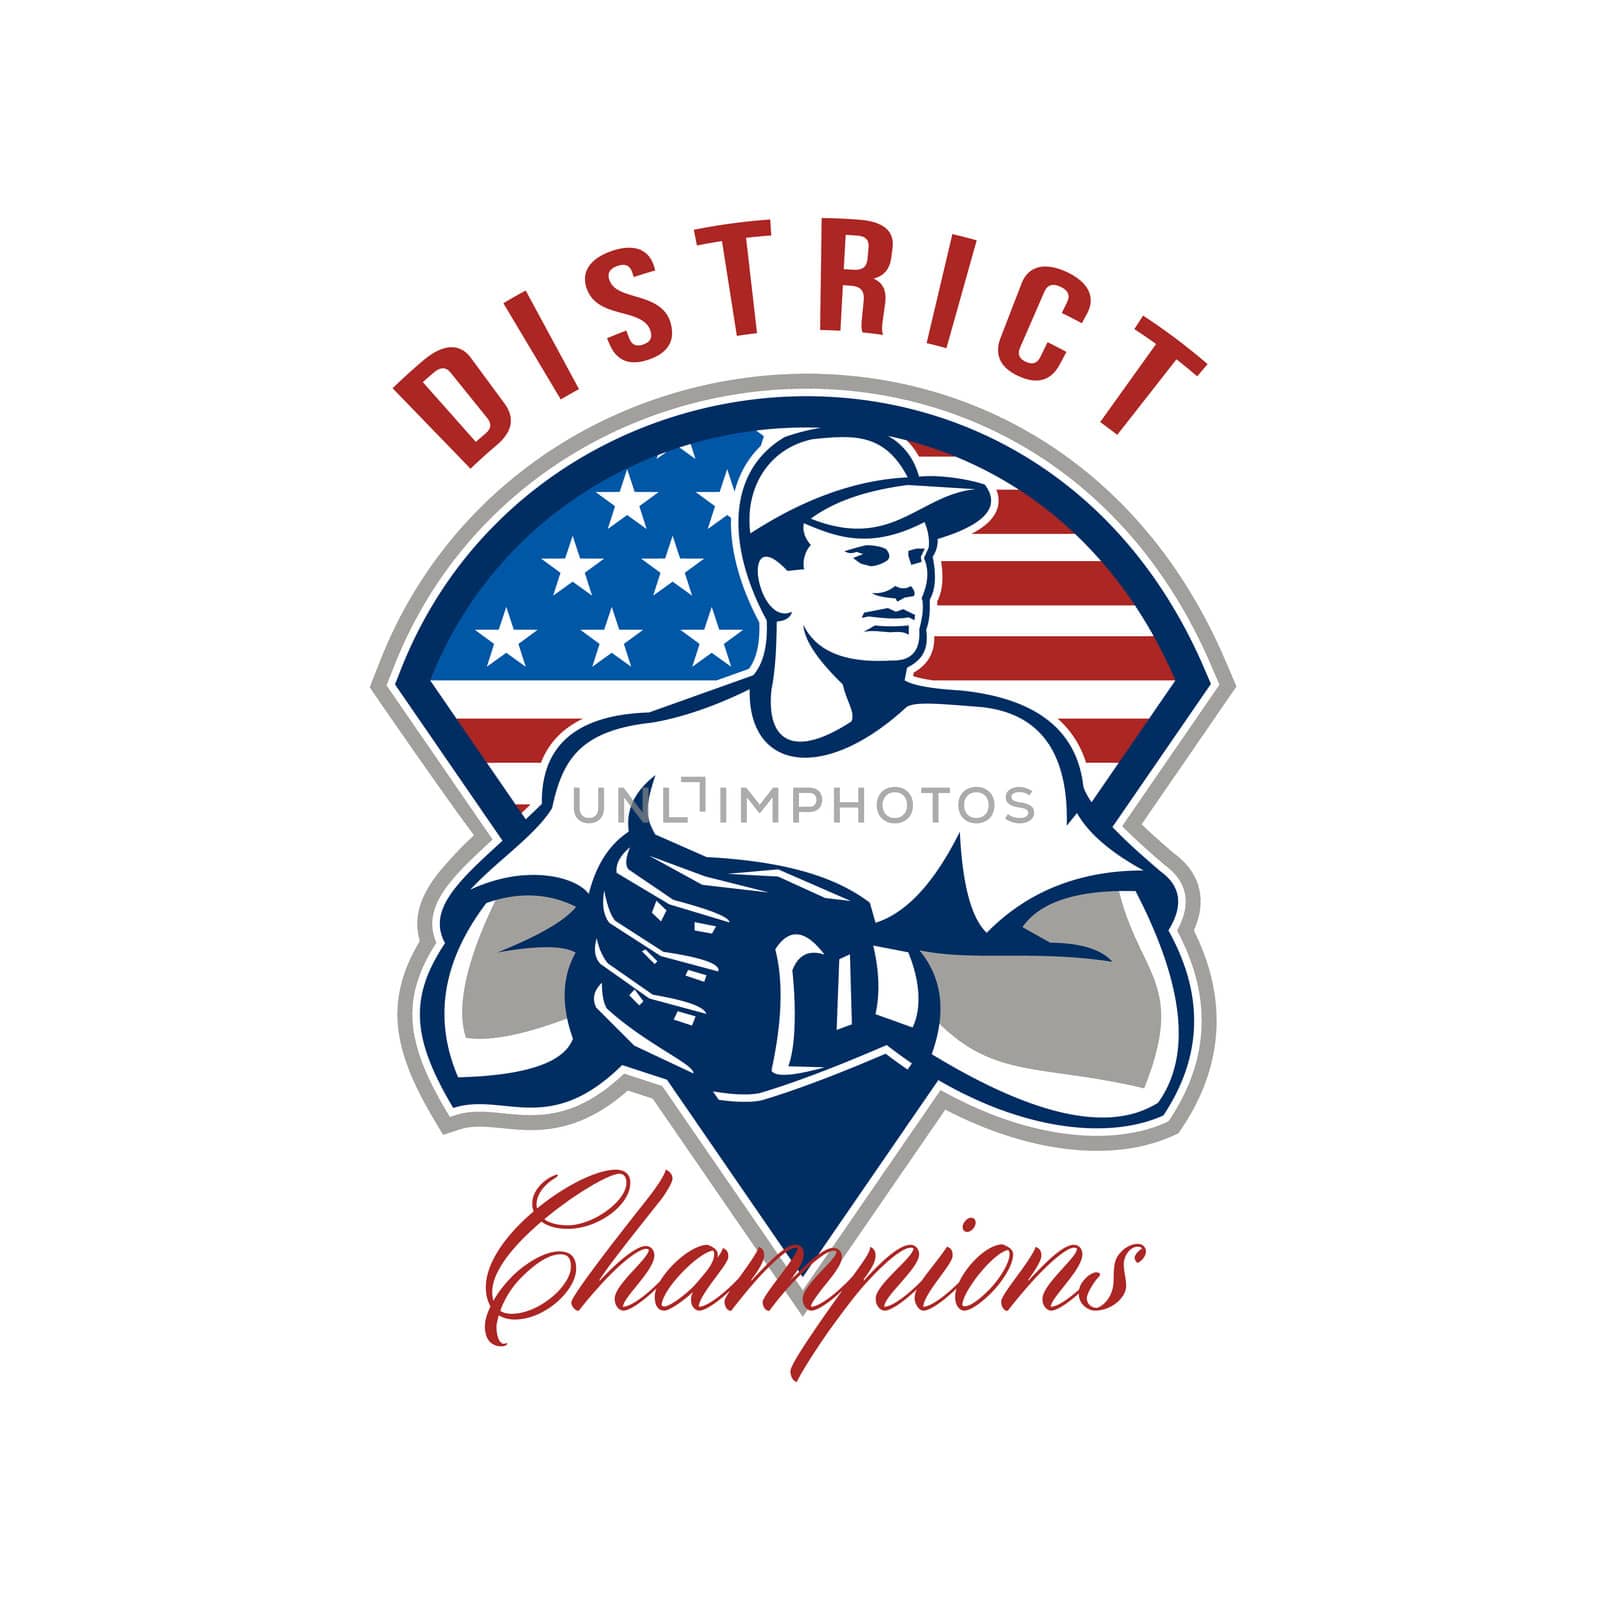 Illustration of an american baseball player pitcher outfilelder with glove set inside triangle with USA stars and stripes flag with words District Champions.